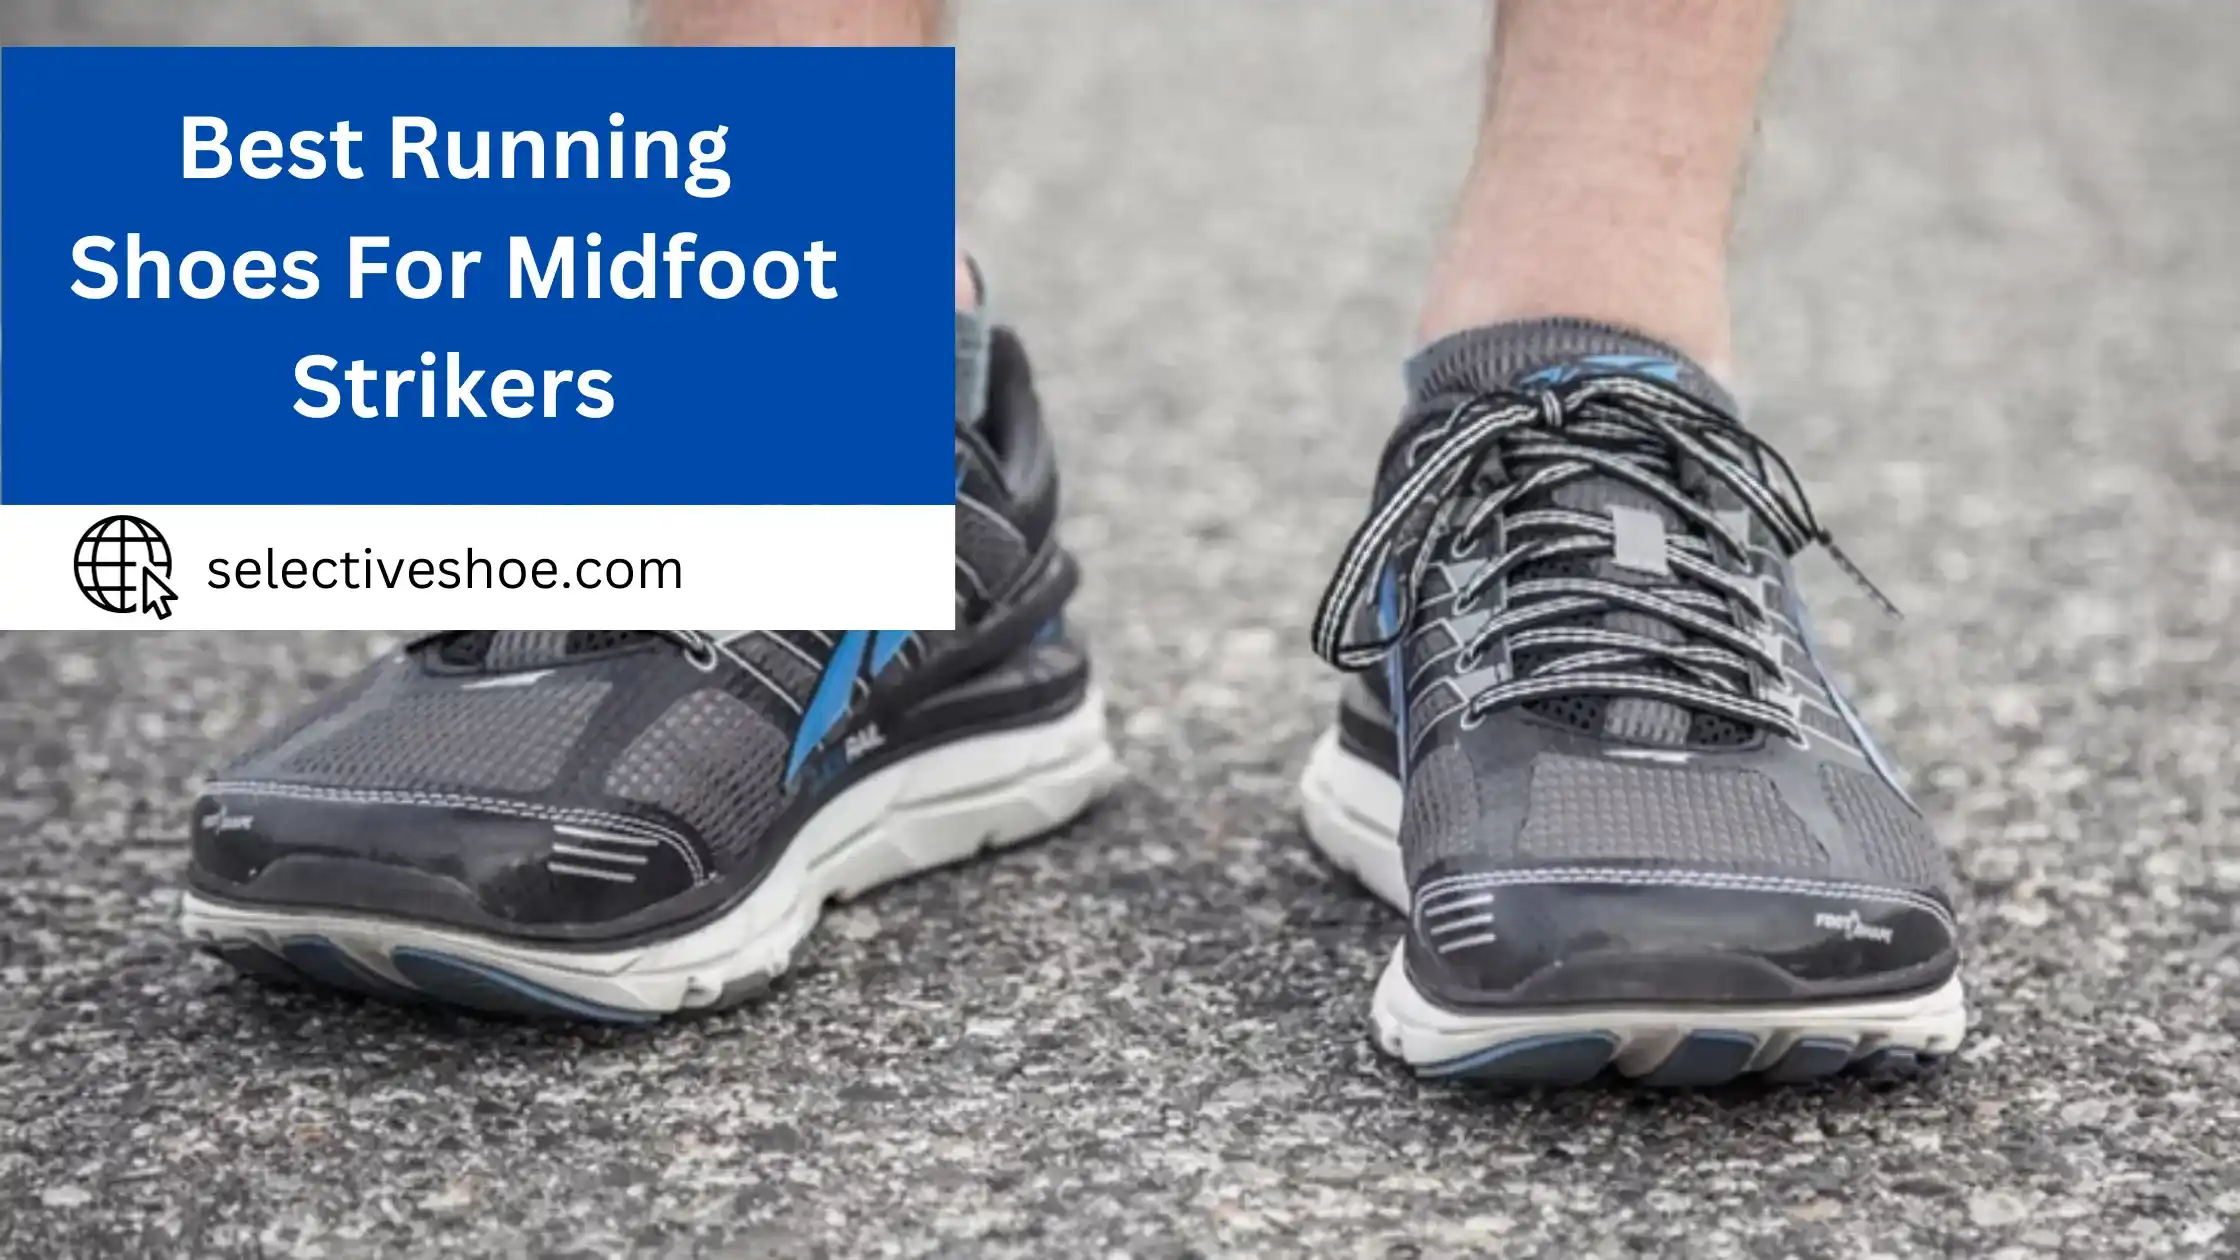 Best Running Shoes For Midfoot Strikers - (Complete Reviews)